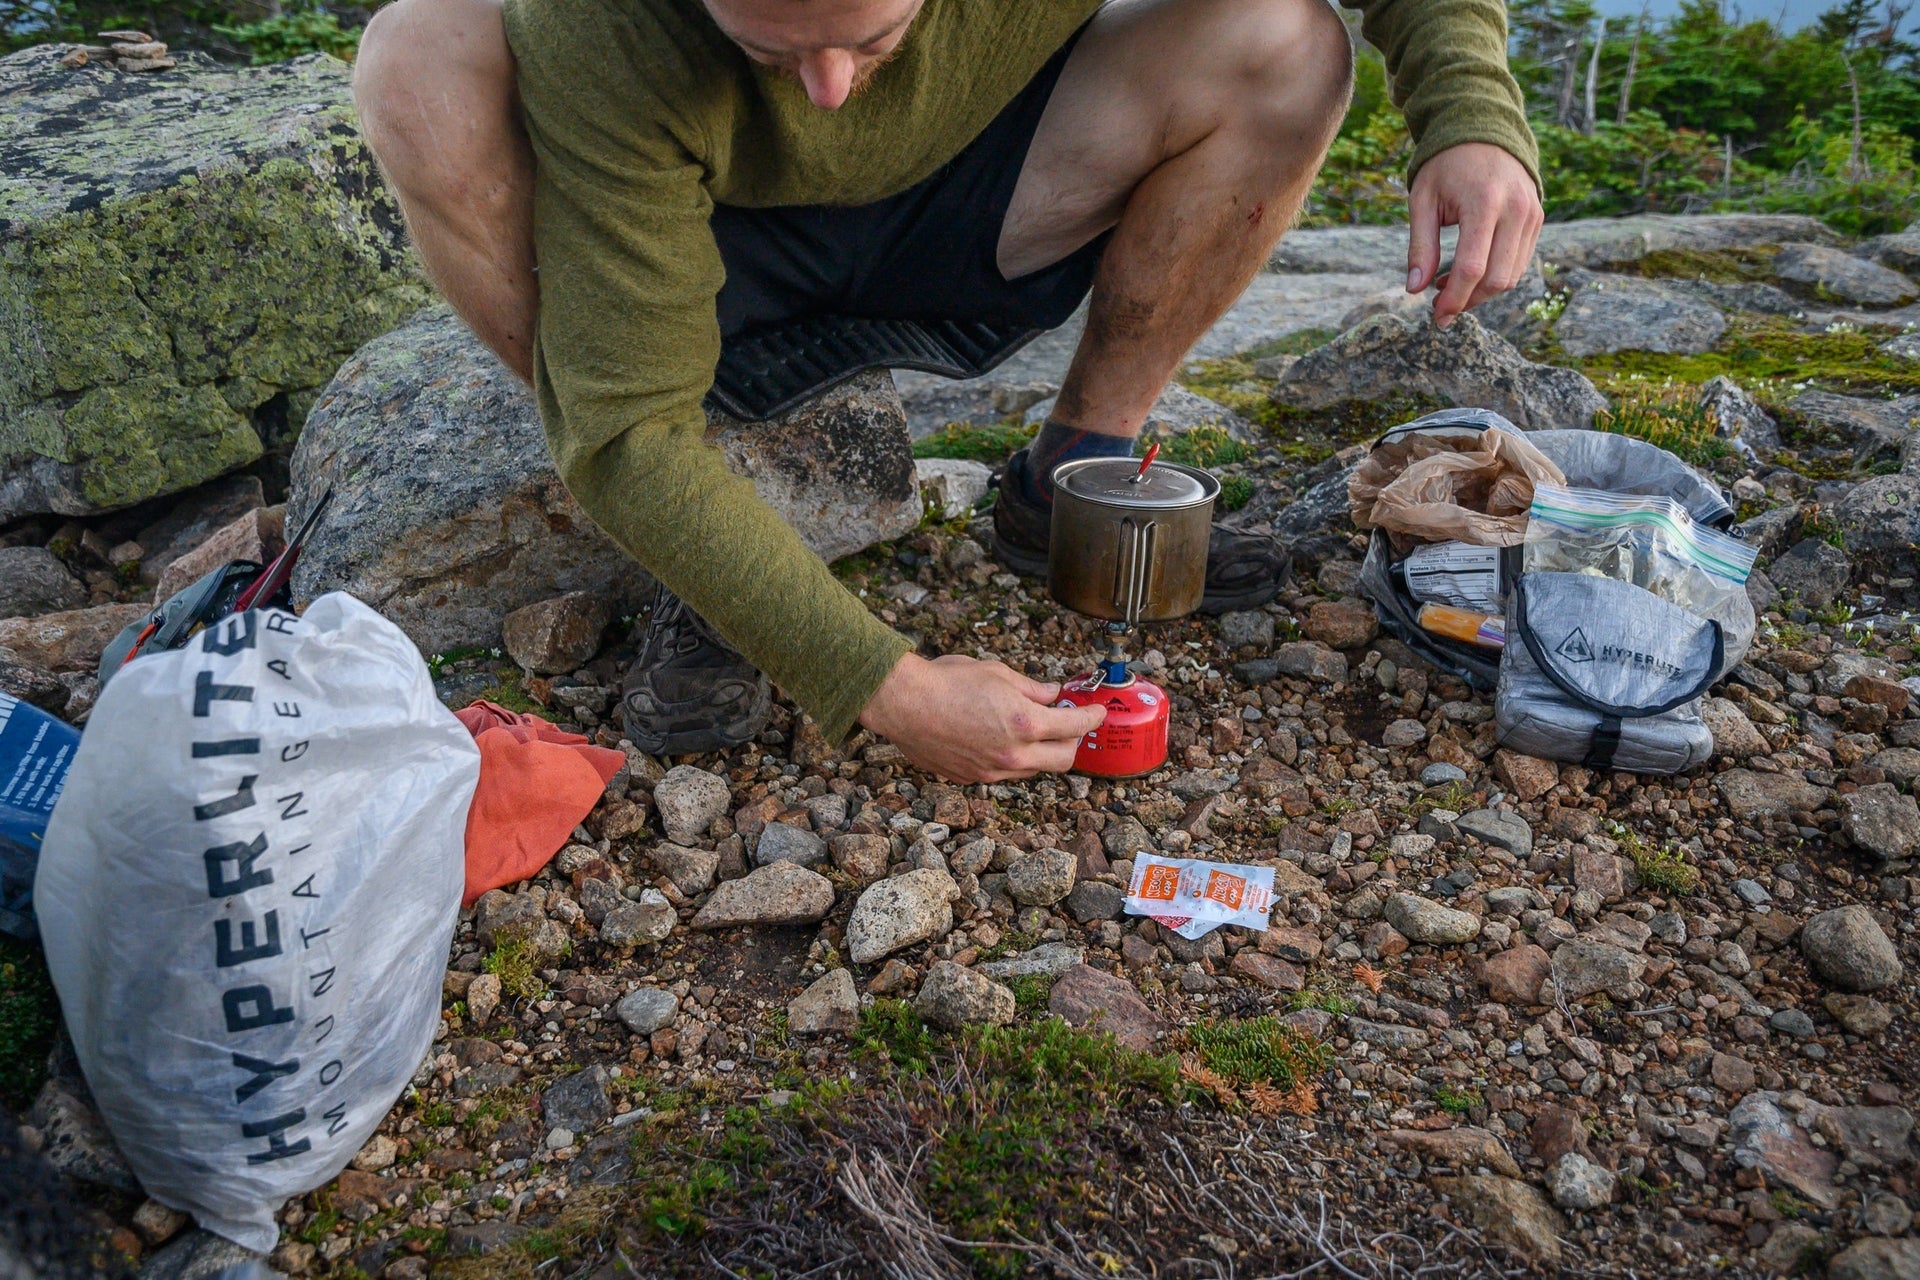 A man is preparing food on a rock in the mountains.